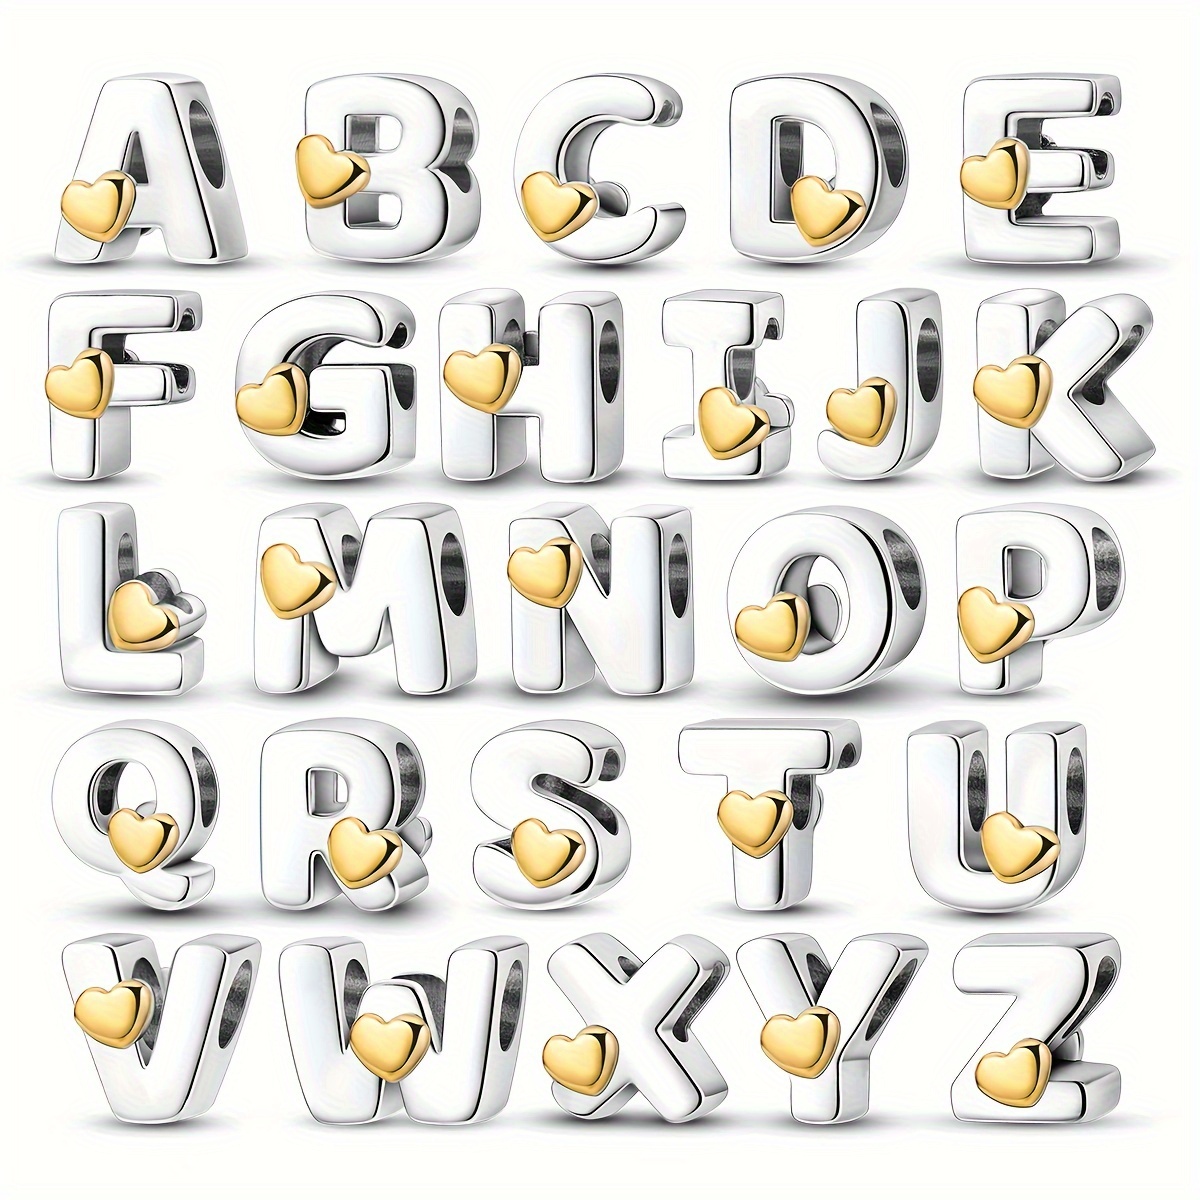 Alphabet Lore Letter Characters / Birthday toppers/ educational Letters/  Fun Gift